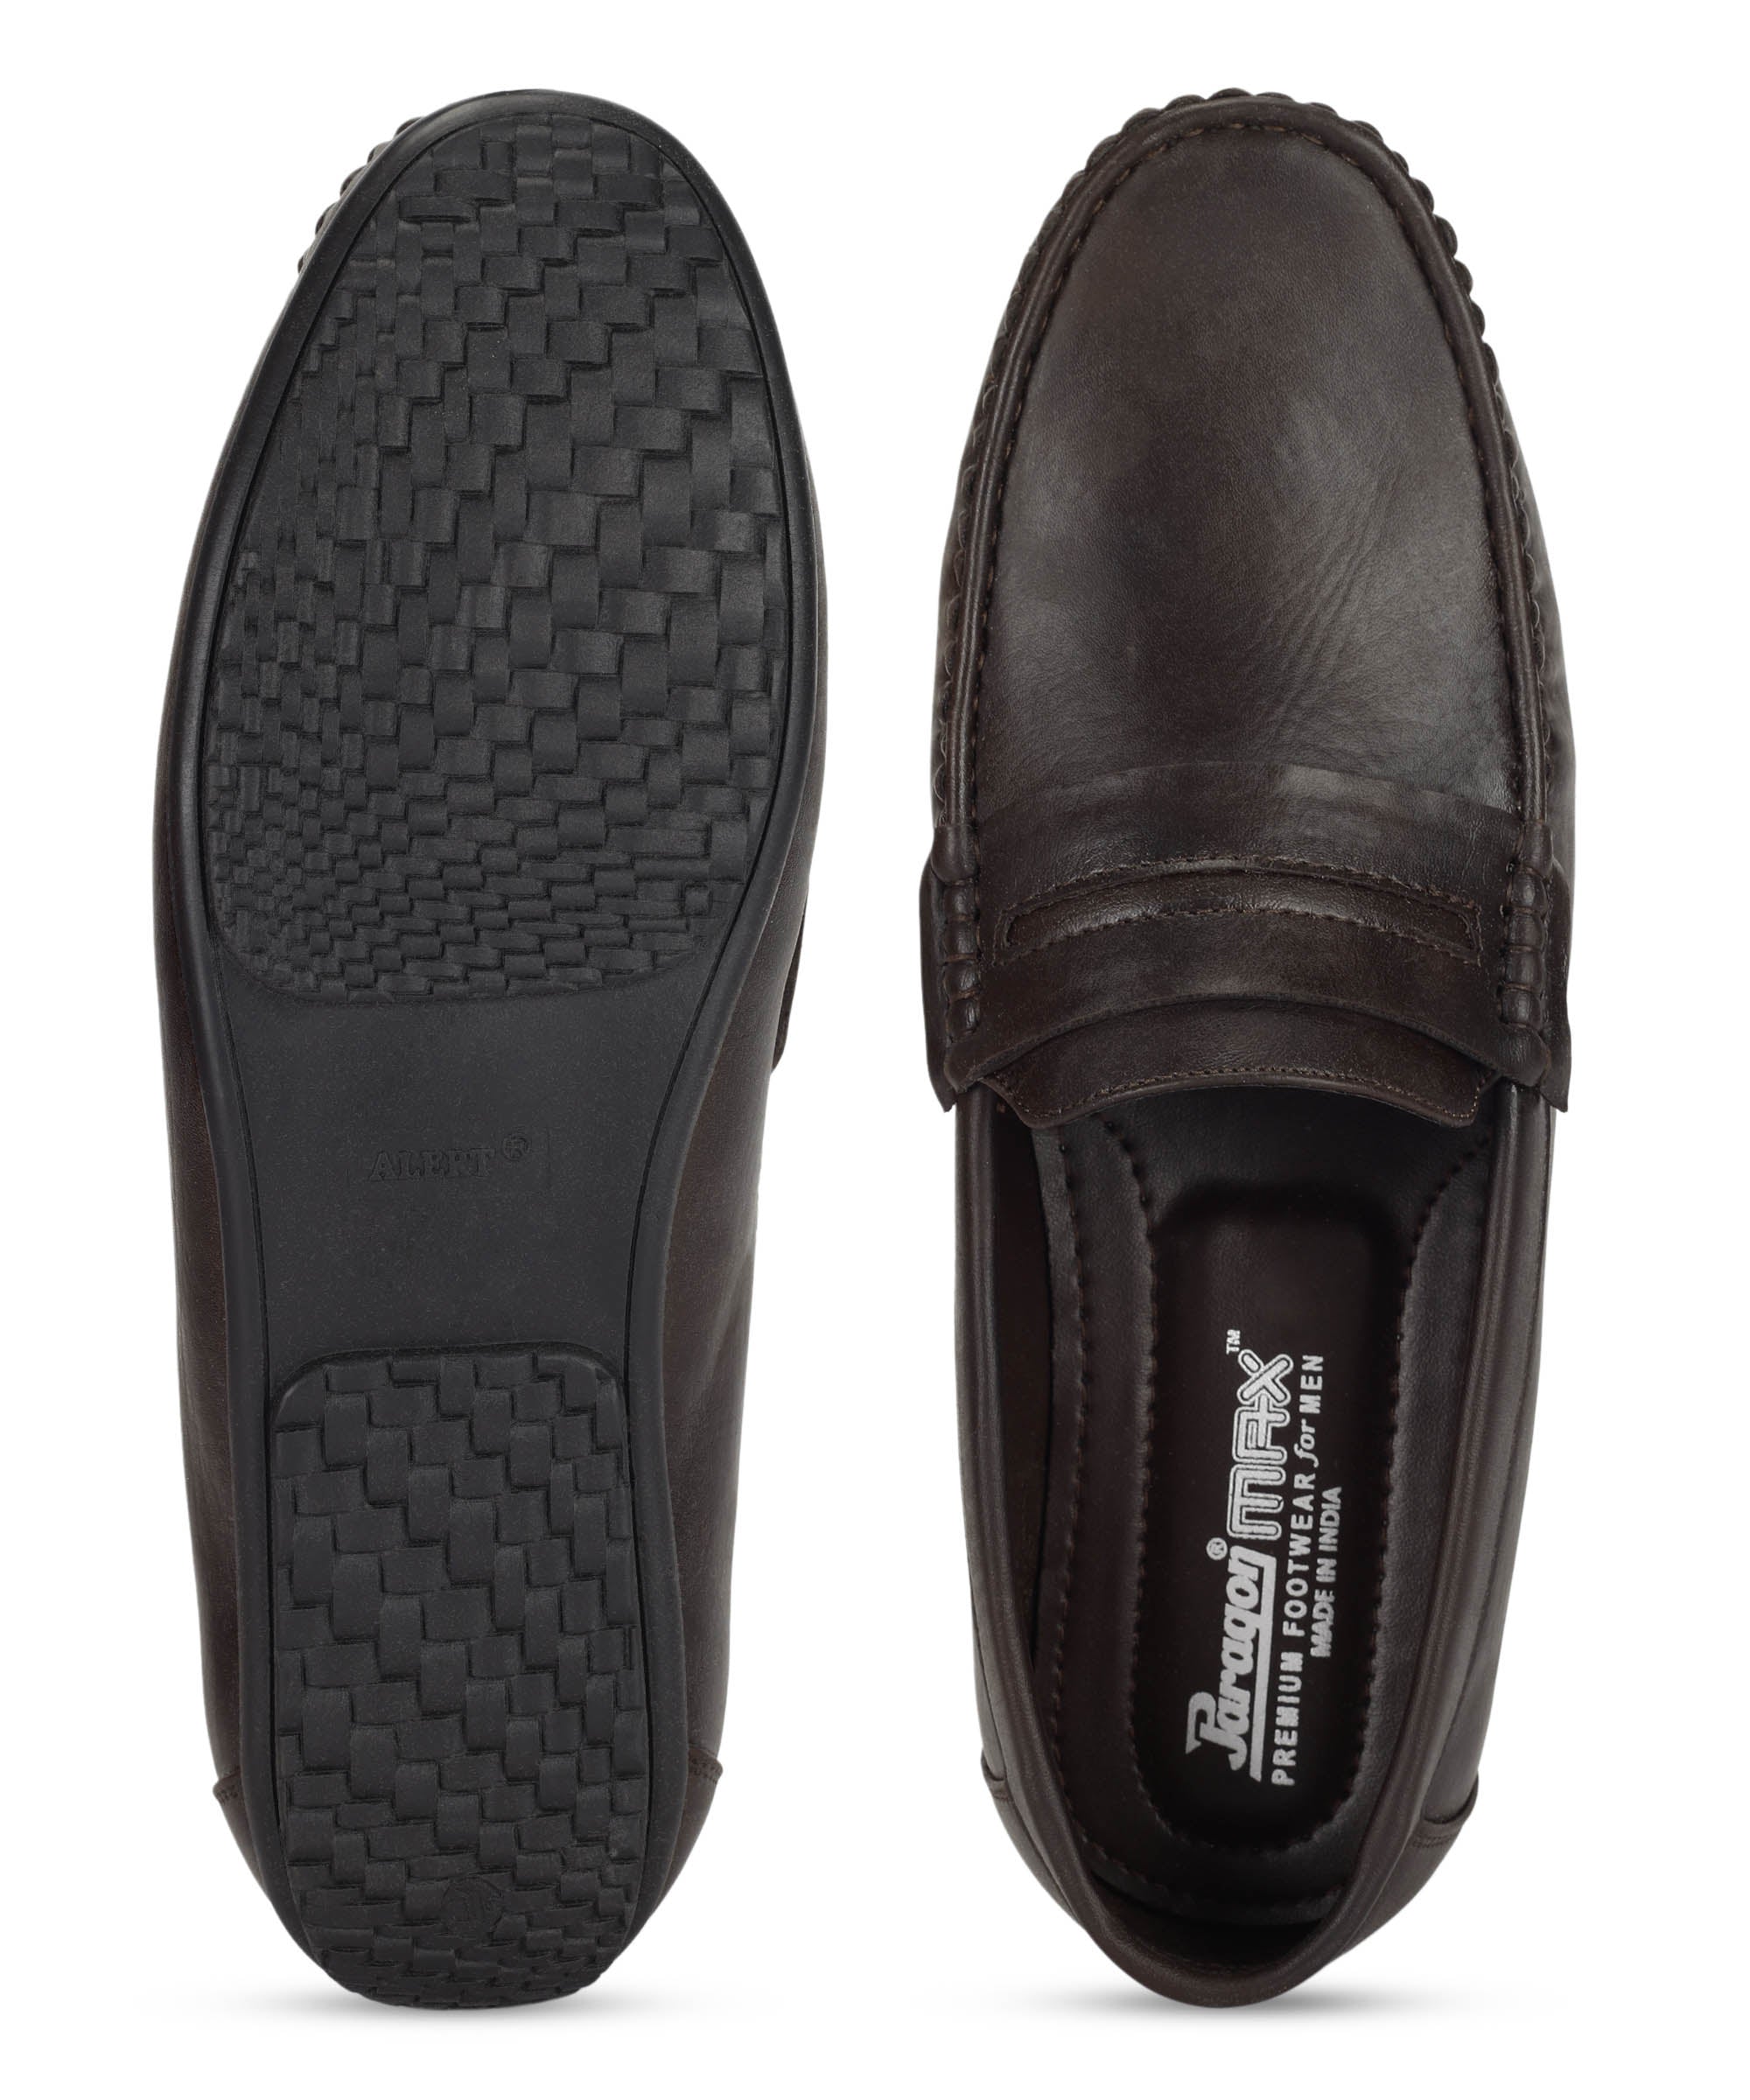 Paragon K11238G Men Formal Shoes | Corporate Office Shoes | Smart &amp; Sleek Design | Comfortable Sole with Cushioning | Daily &amp; Occasion Wear